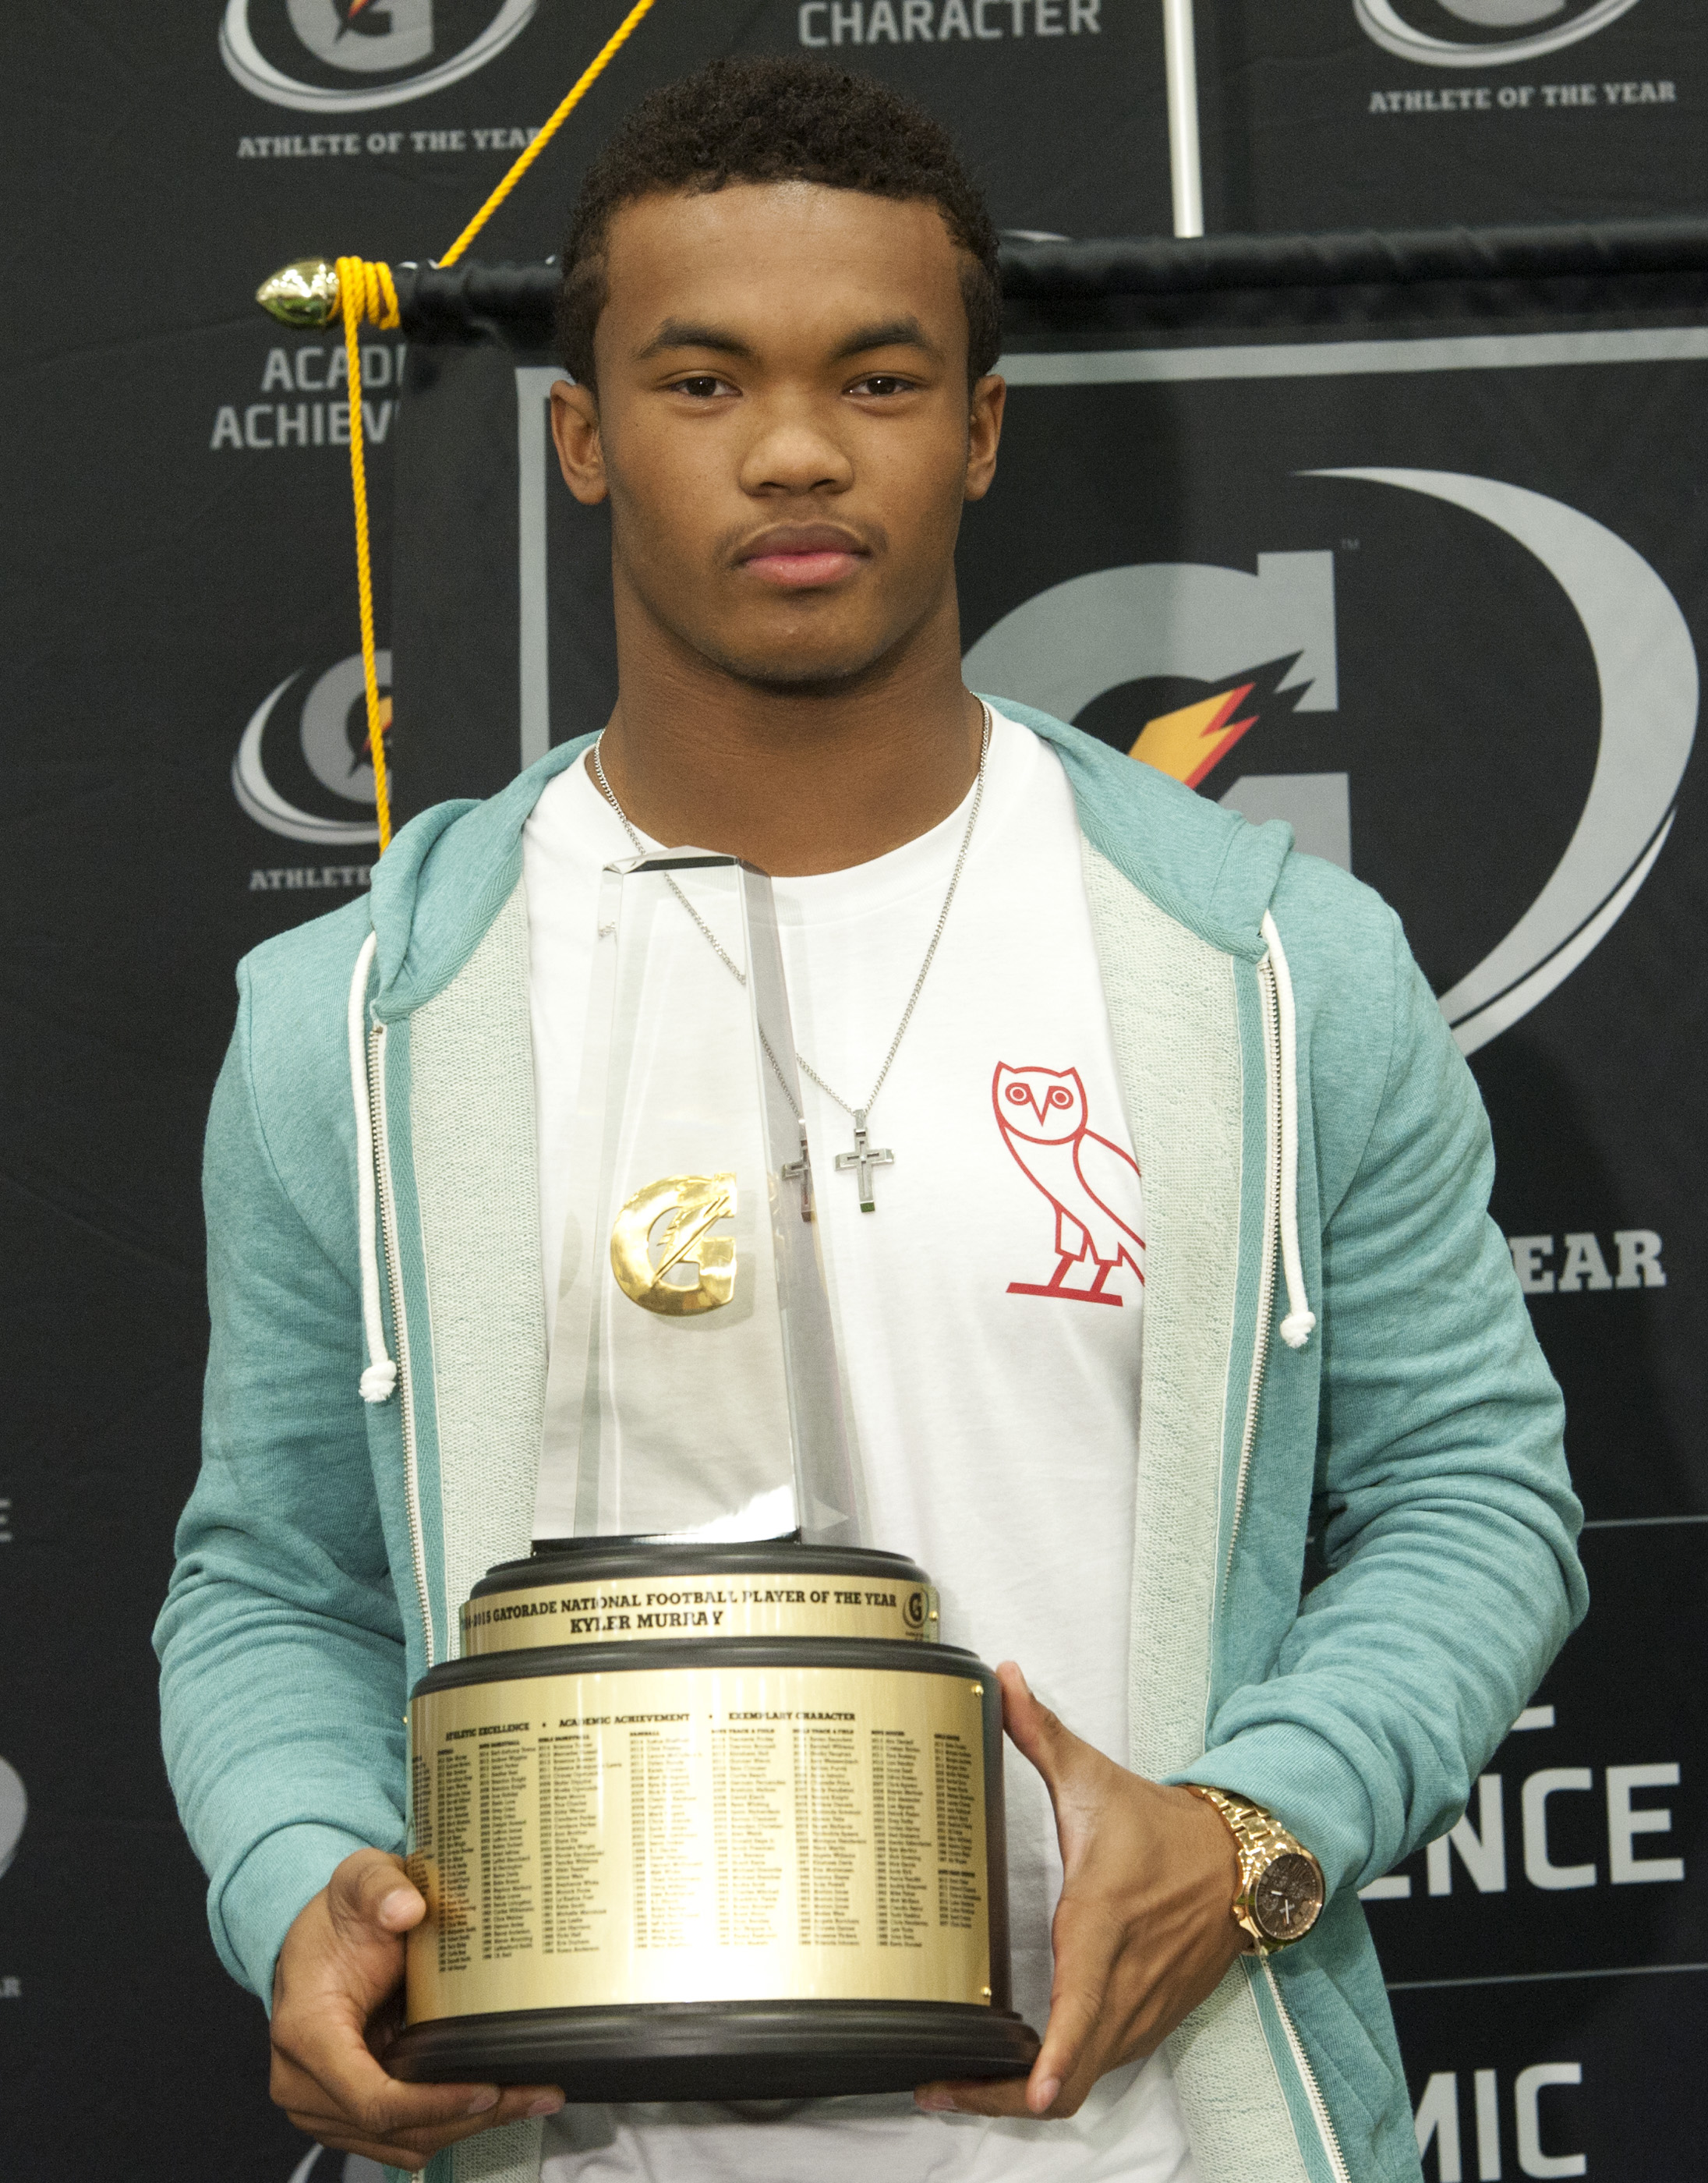 Kyler Murray holds the trophy during a press conference after being named the 2014-15 Gatorade National Football Player of the Year. / Susan Goldman, Gatorade